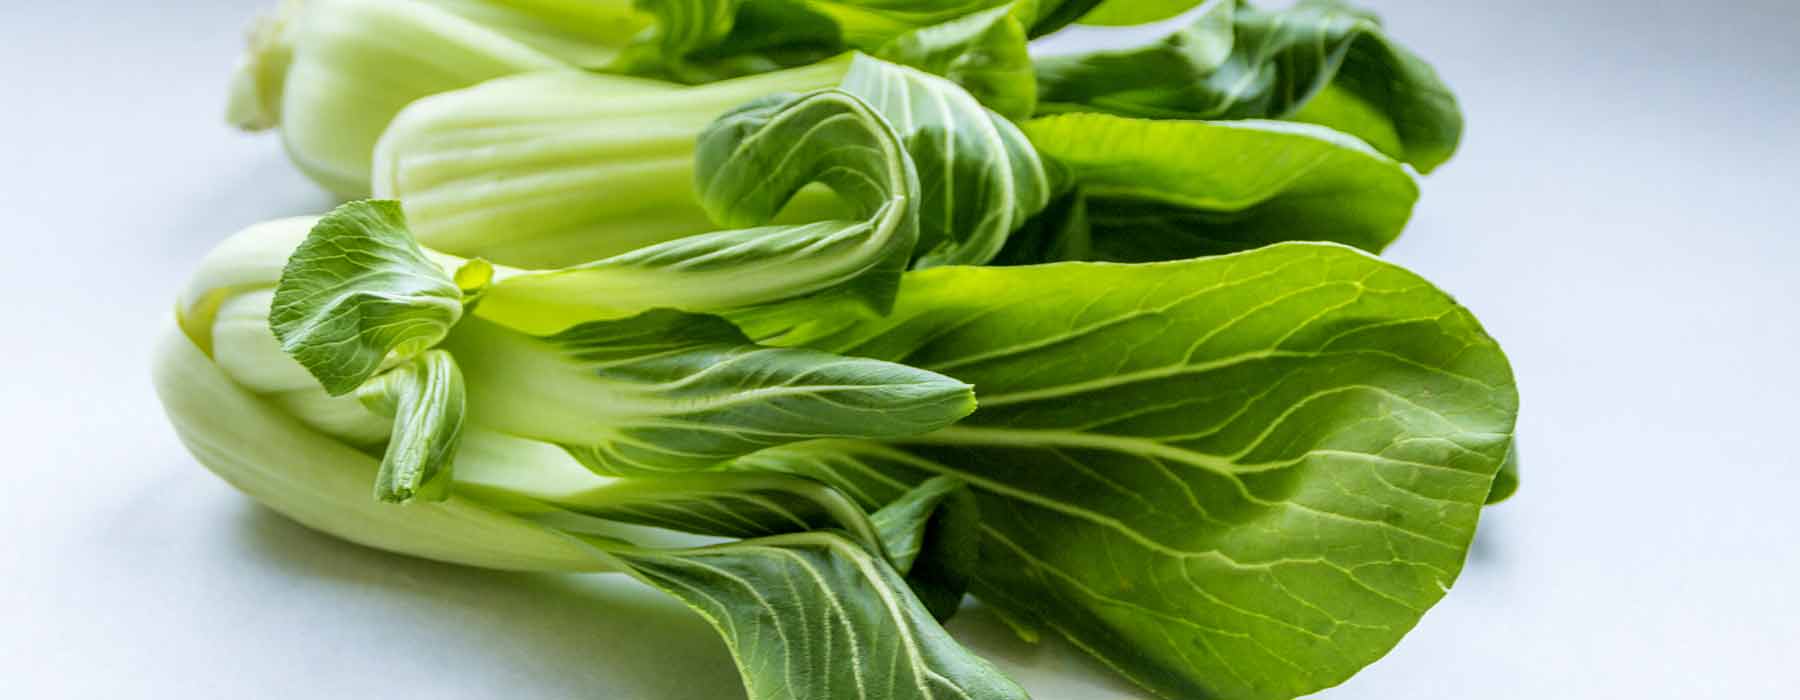 washed bok choy for guinea pigs to eat